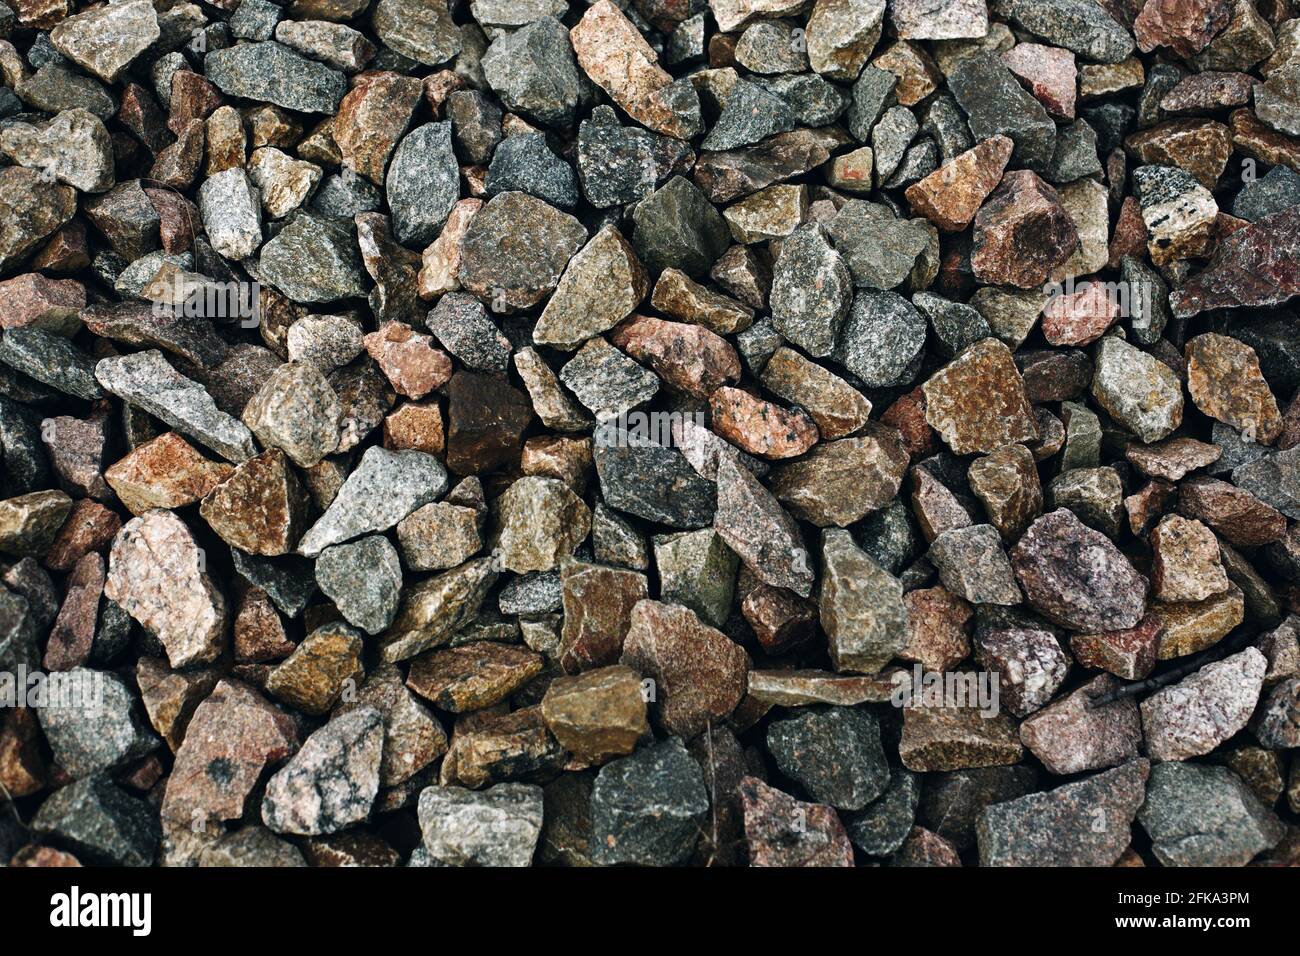 Old colorful stones rough background, many rocks near railway track Stock Photo